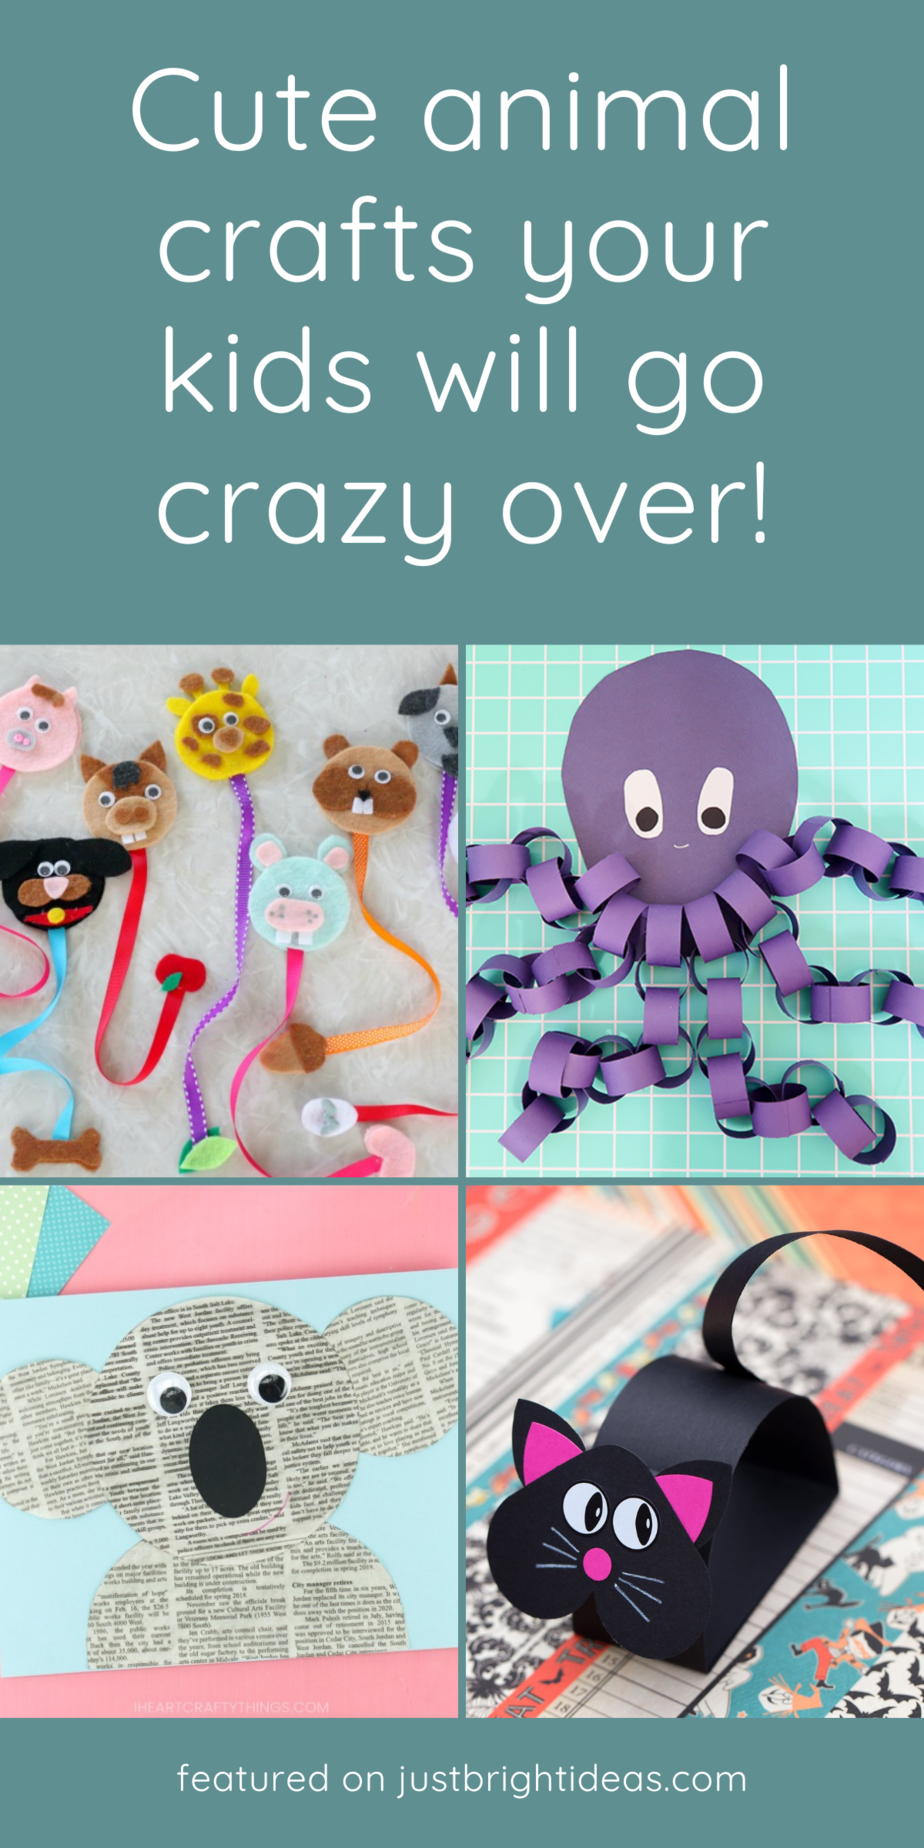 🐾 Your kids will love getting creative  with these adorable and easy-to-make animal crafts. Perfect for children of all ages - and grownups too! 🎨✨